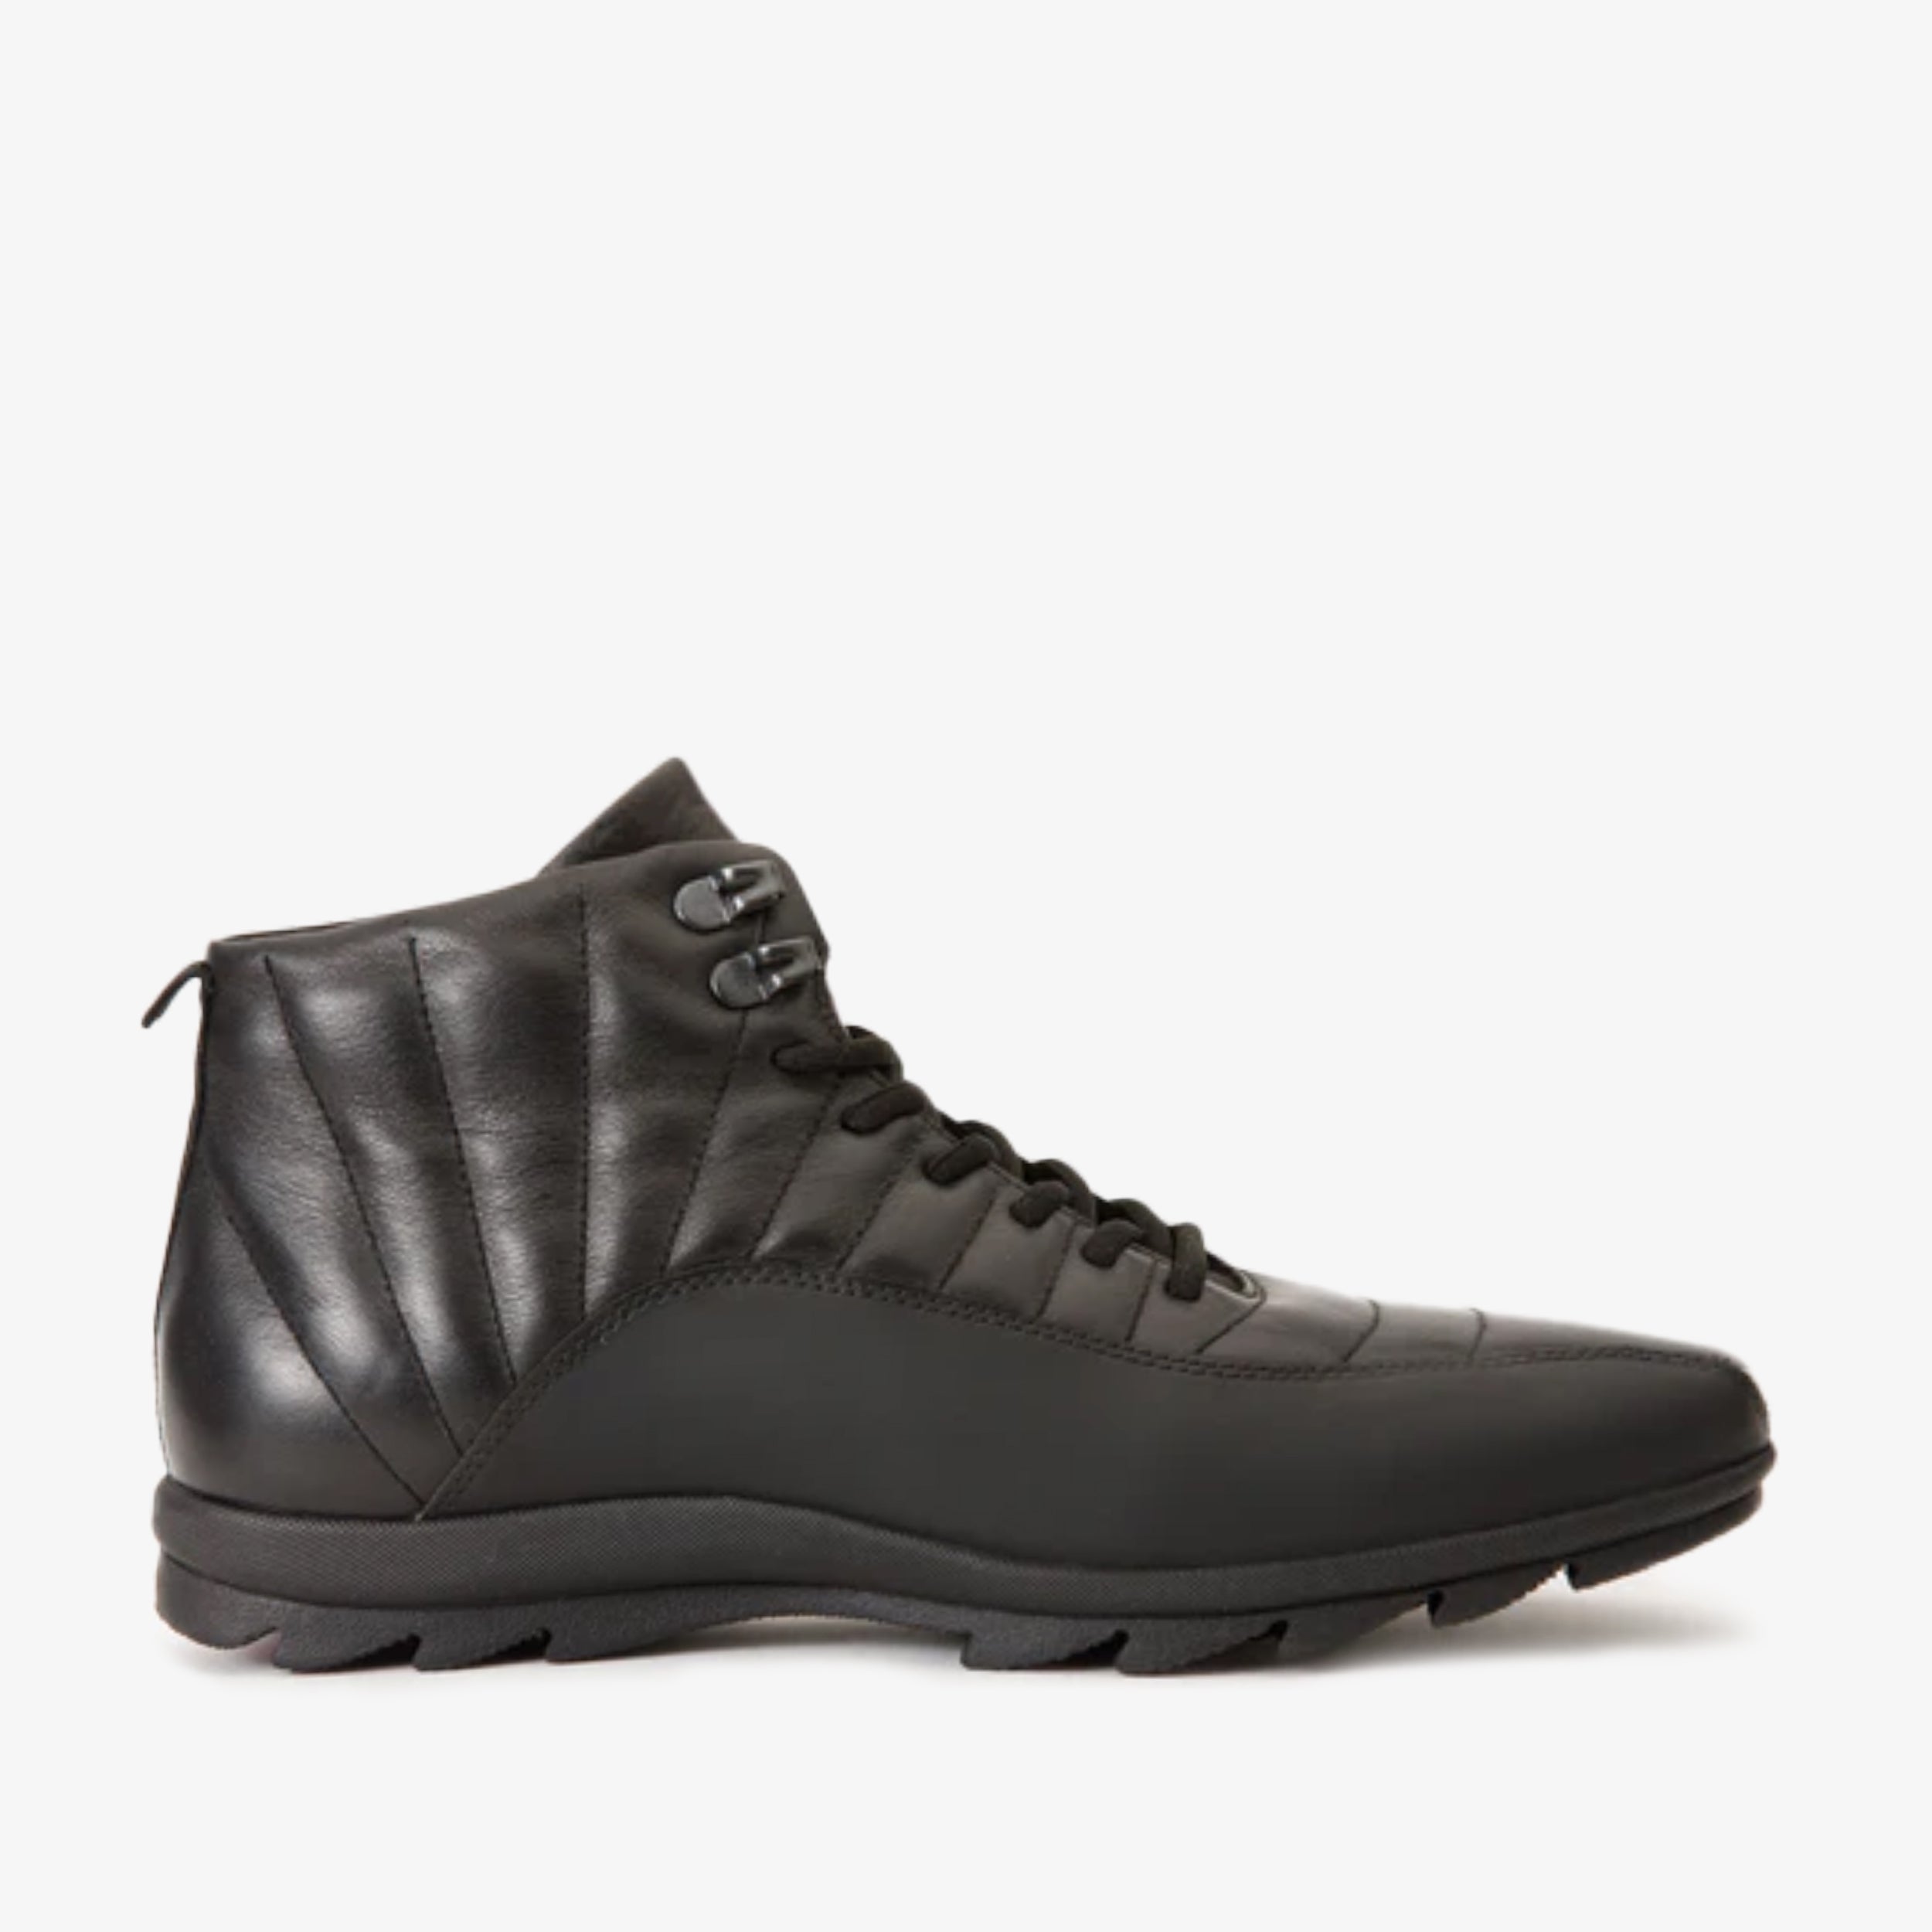 The Merter Black Leather Casual Lace-Up Men Boot